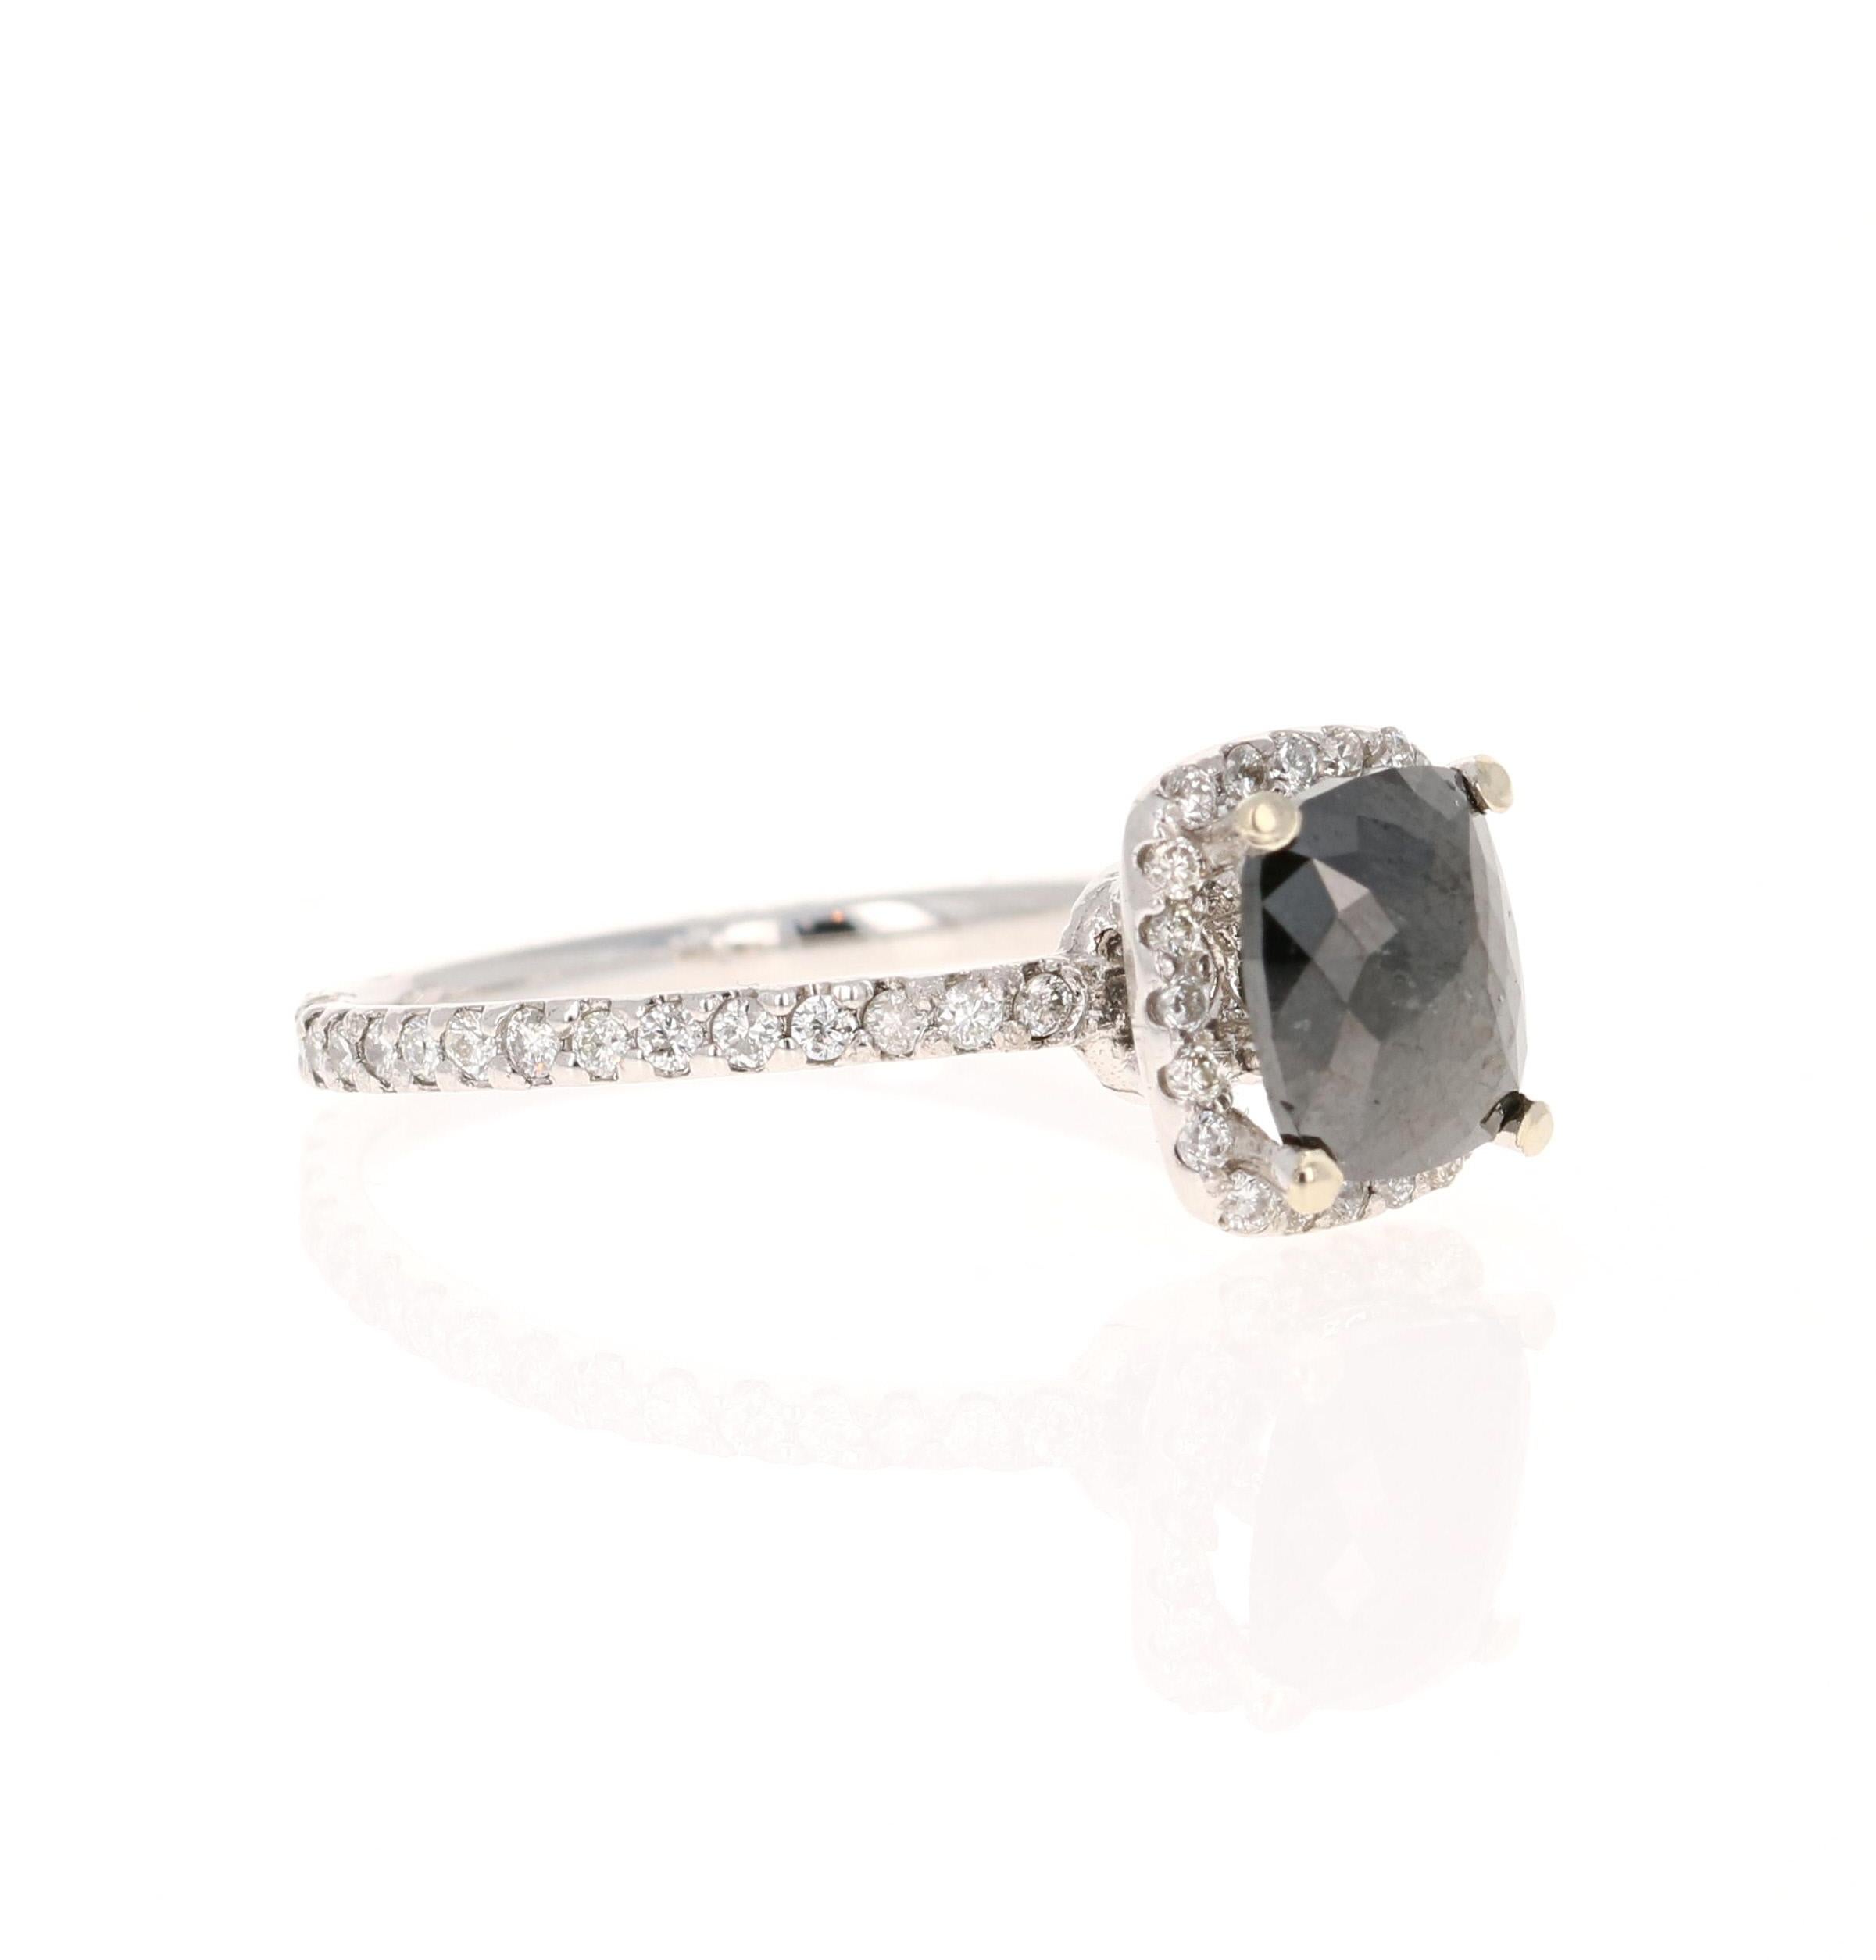 The Rectangular Cushion Cut Black Diamond is 3.84 Carats and is surrounded by 52 Round Cut Diamonds weighing 1.08 Carats (Clarity: VS, Color: H) and 52 Round Cut Diamonds that weigh 0.44 Carats. The total carat weight of the ring is 1.52 Carats.